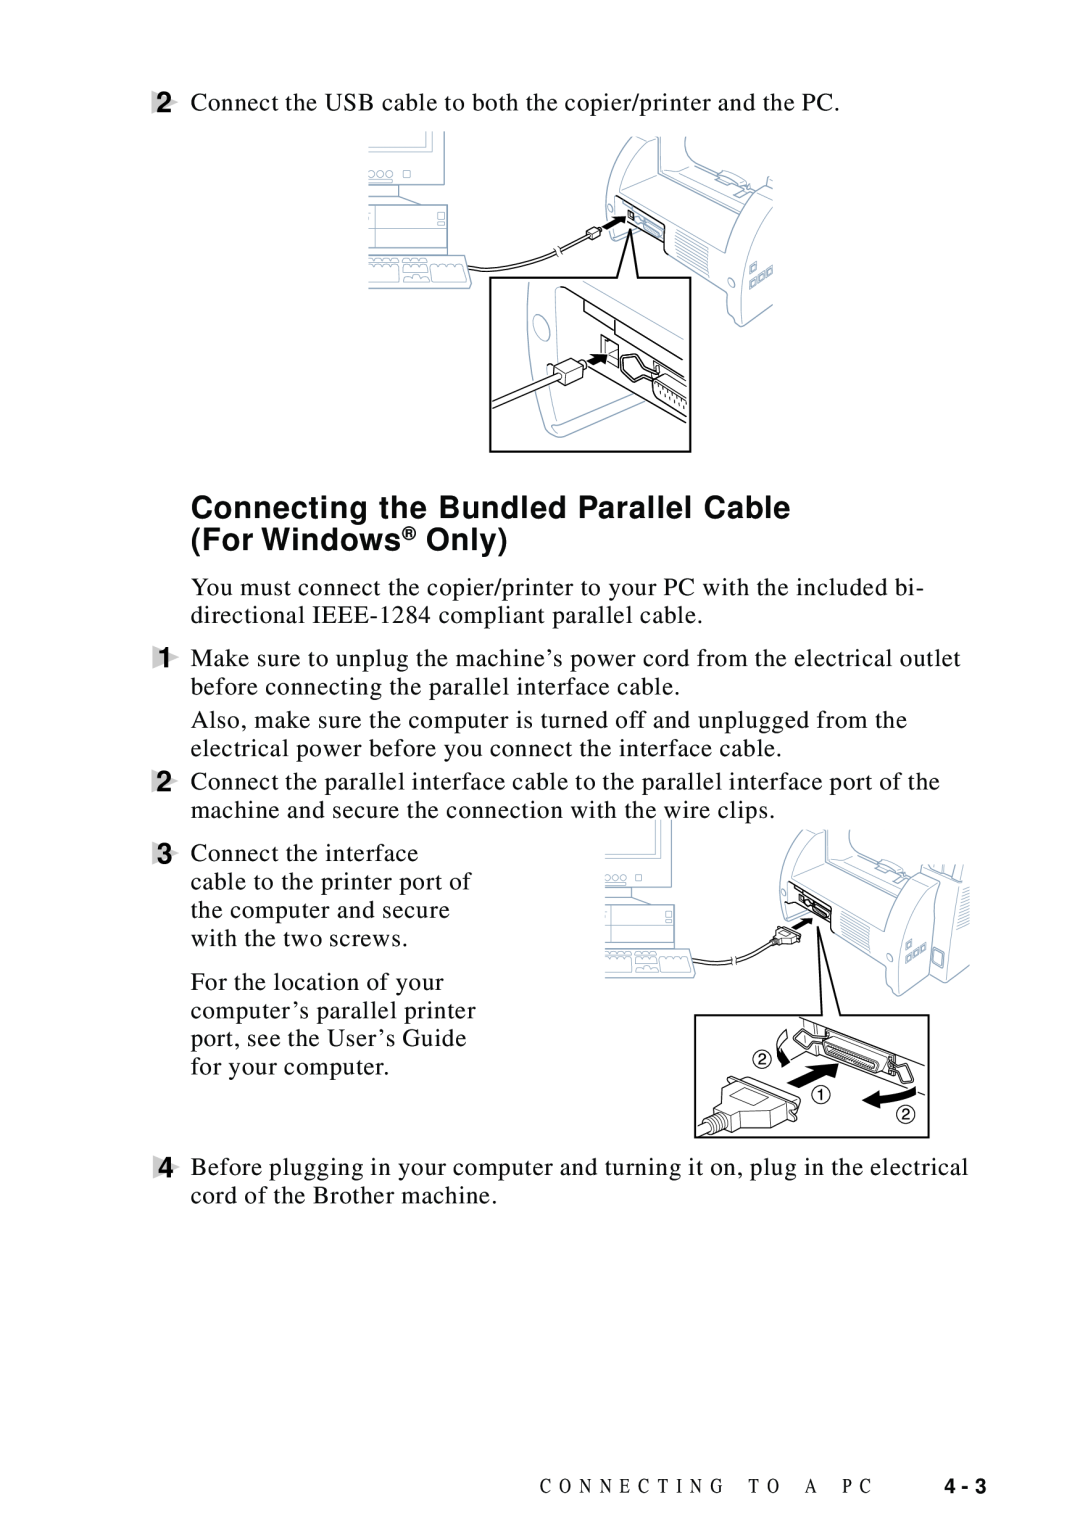 Brother DCP1200 manual Connecting the Bundled Parallel Cable For Windows Only 